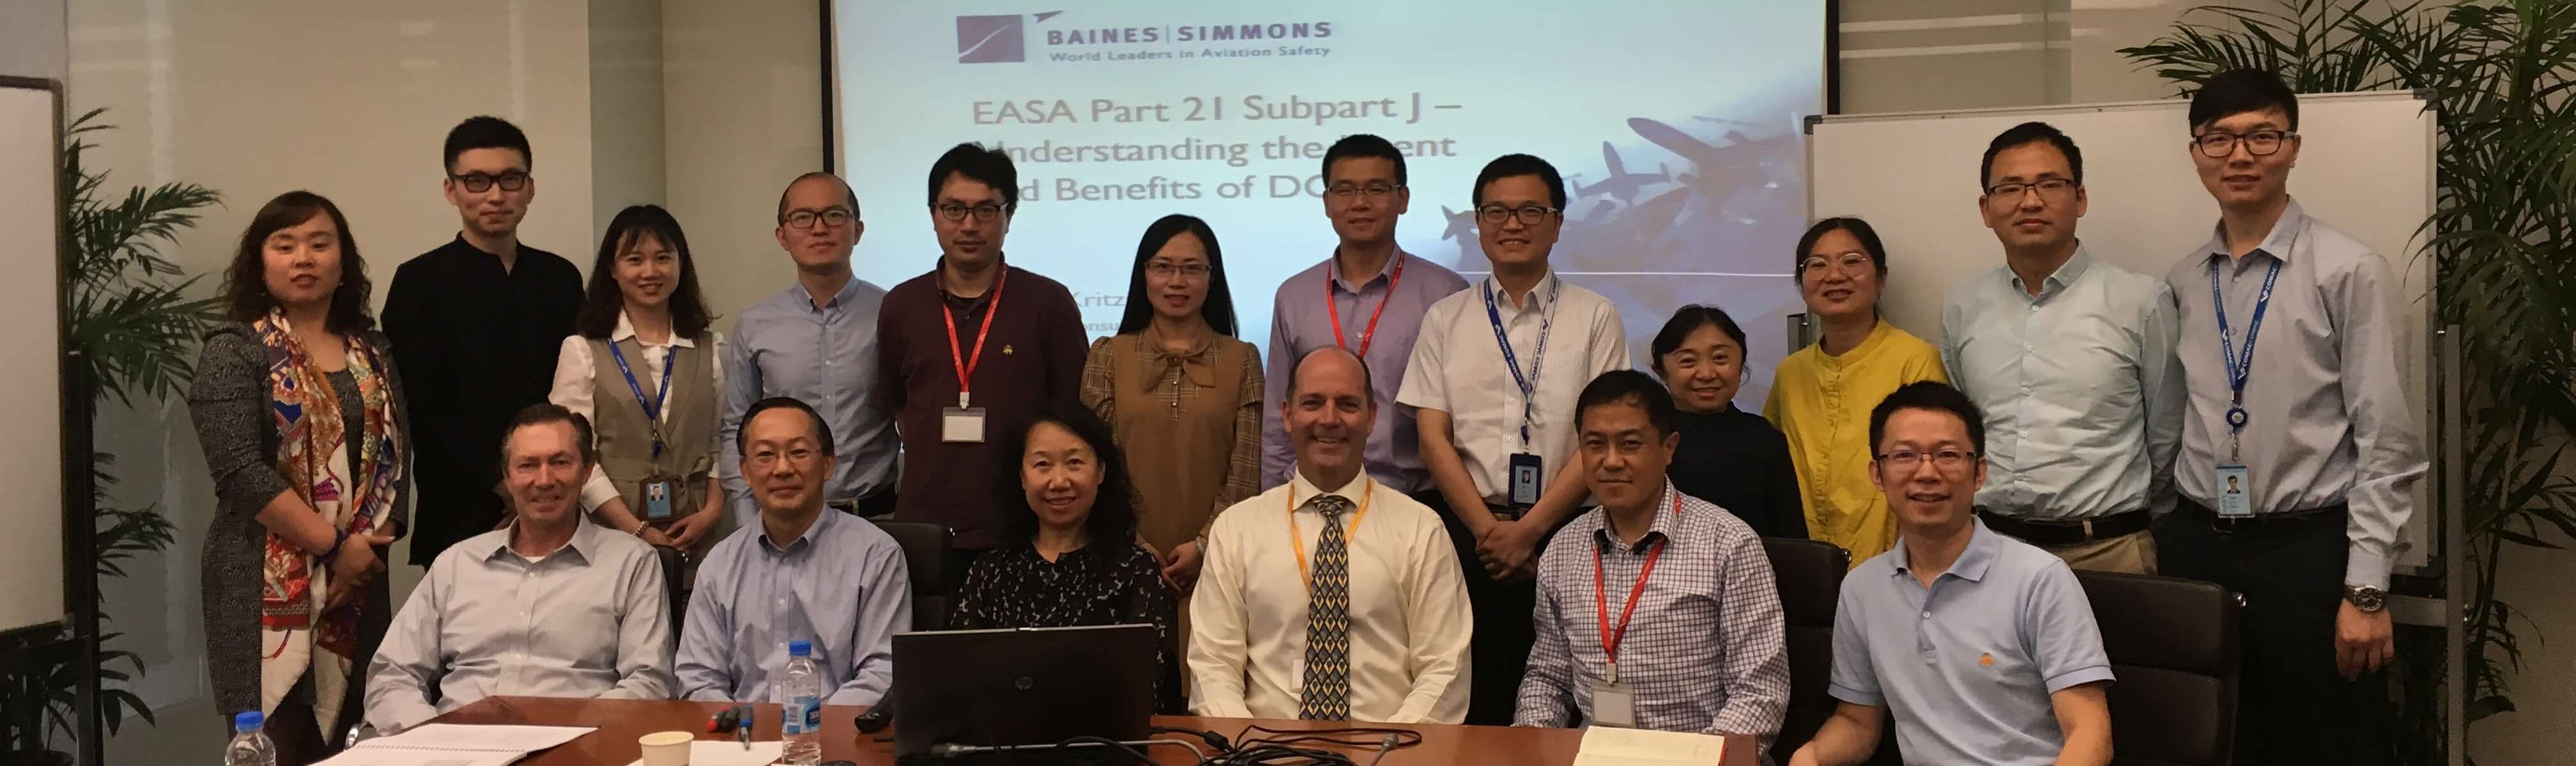 Baines Simmons delivers Part 21 training to COMAC in Shanghai